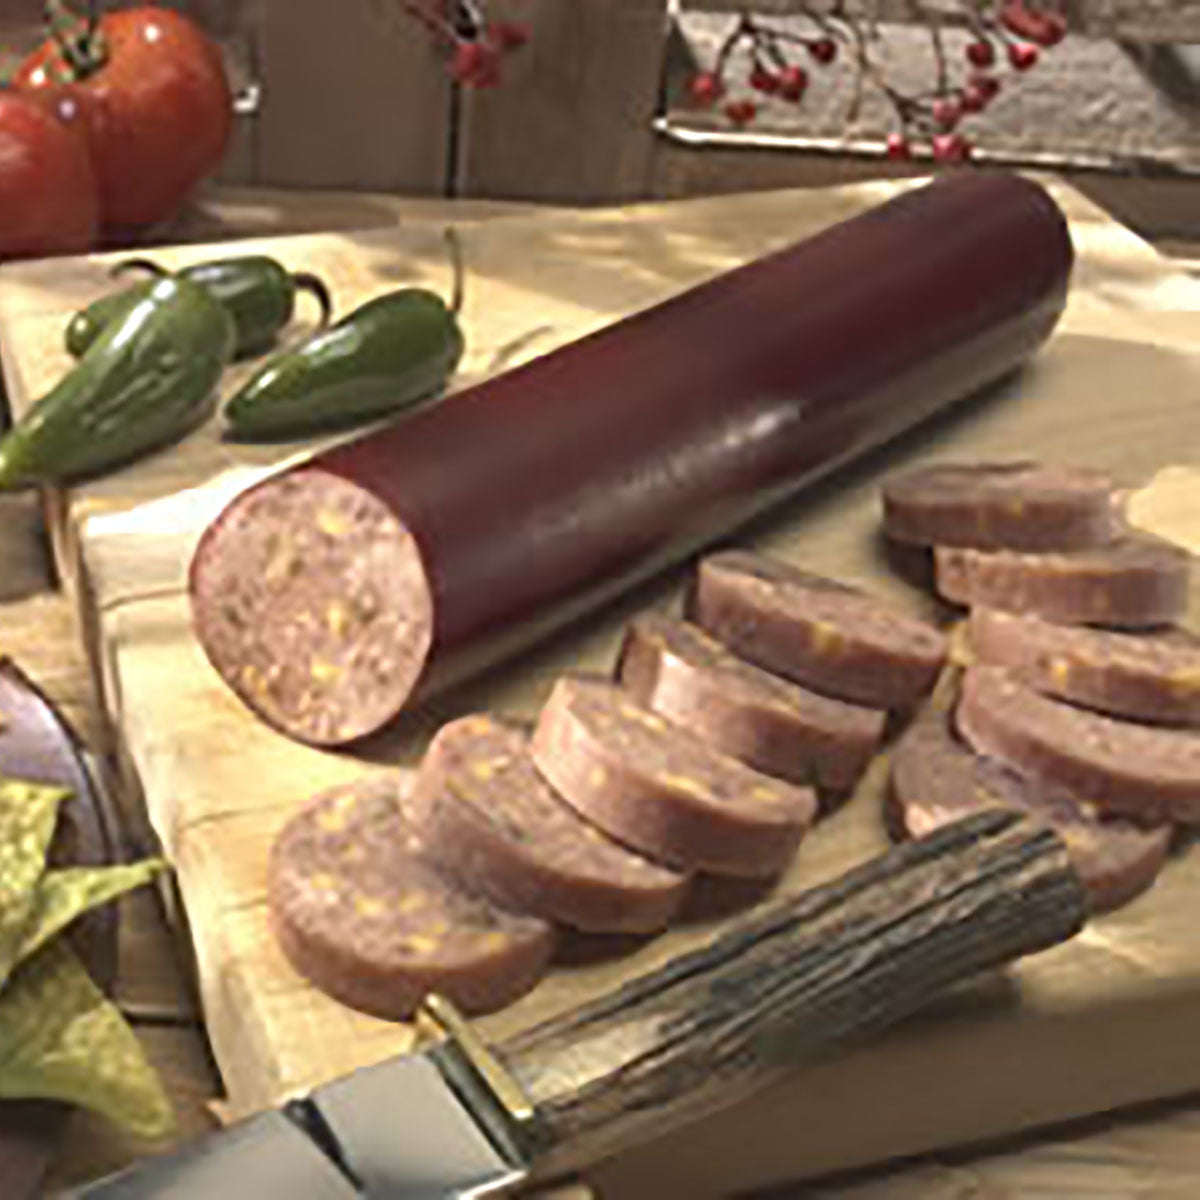 Summer Sausage, Pork & Venison with Jalapeno and Cheese 12oz (6-packages)